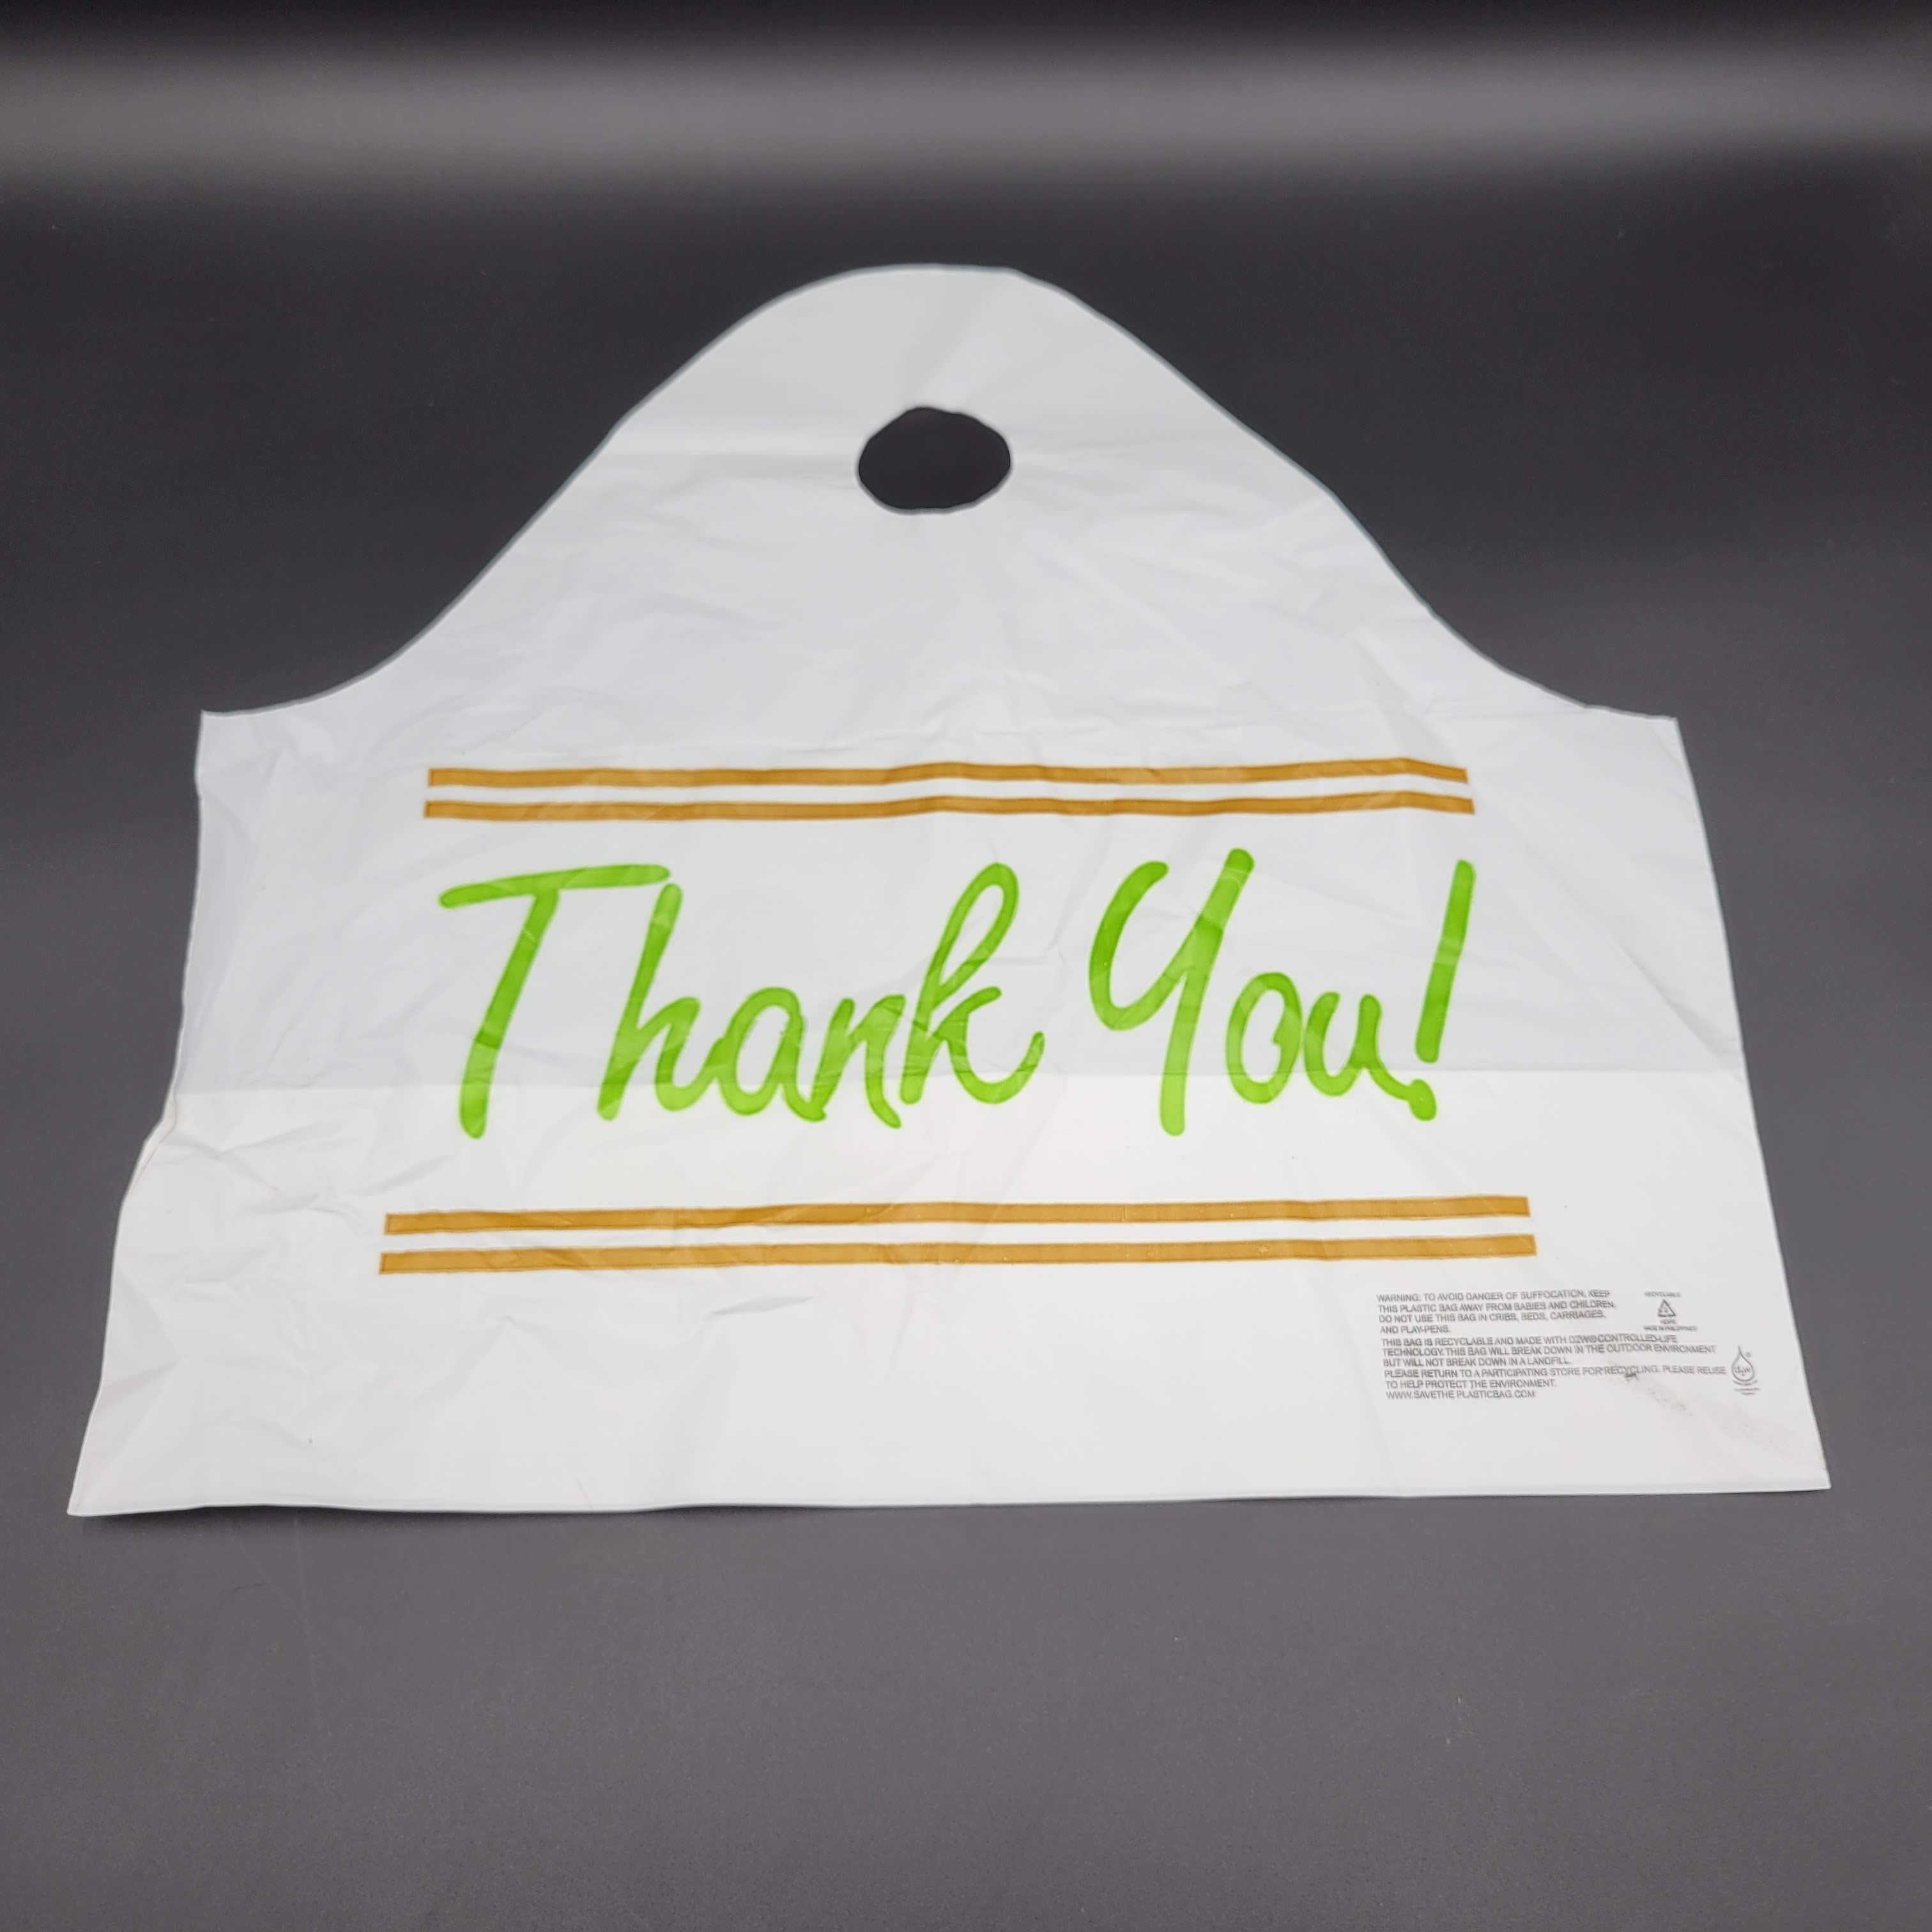 HDPE Plastic "Thank You" Take-Out Bag Wave Top Handle White 19" x 18" - 500/Case